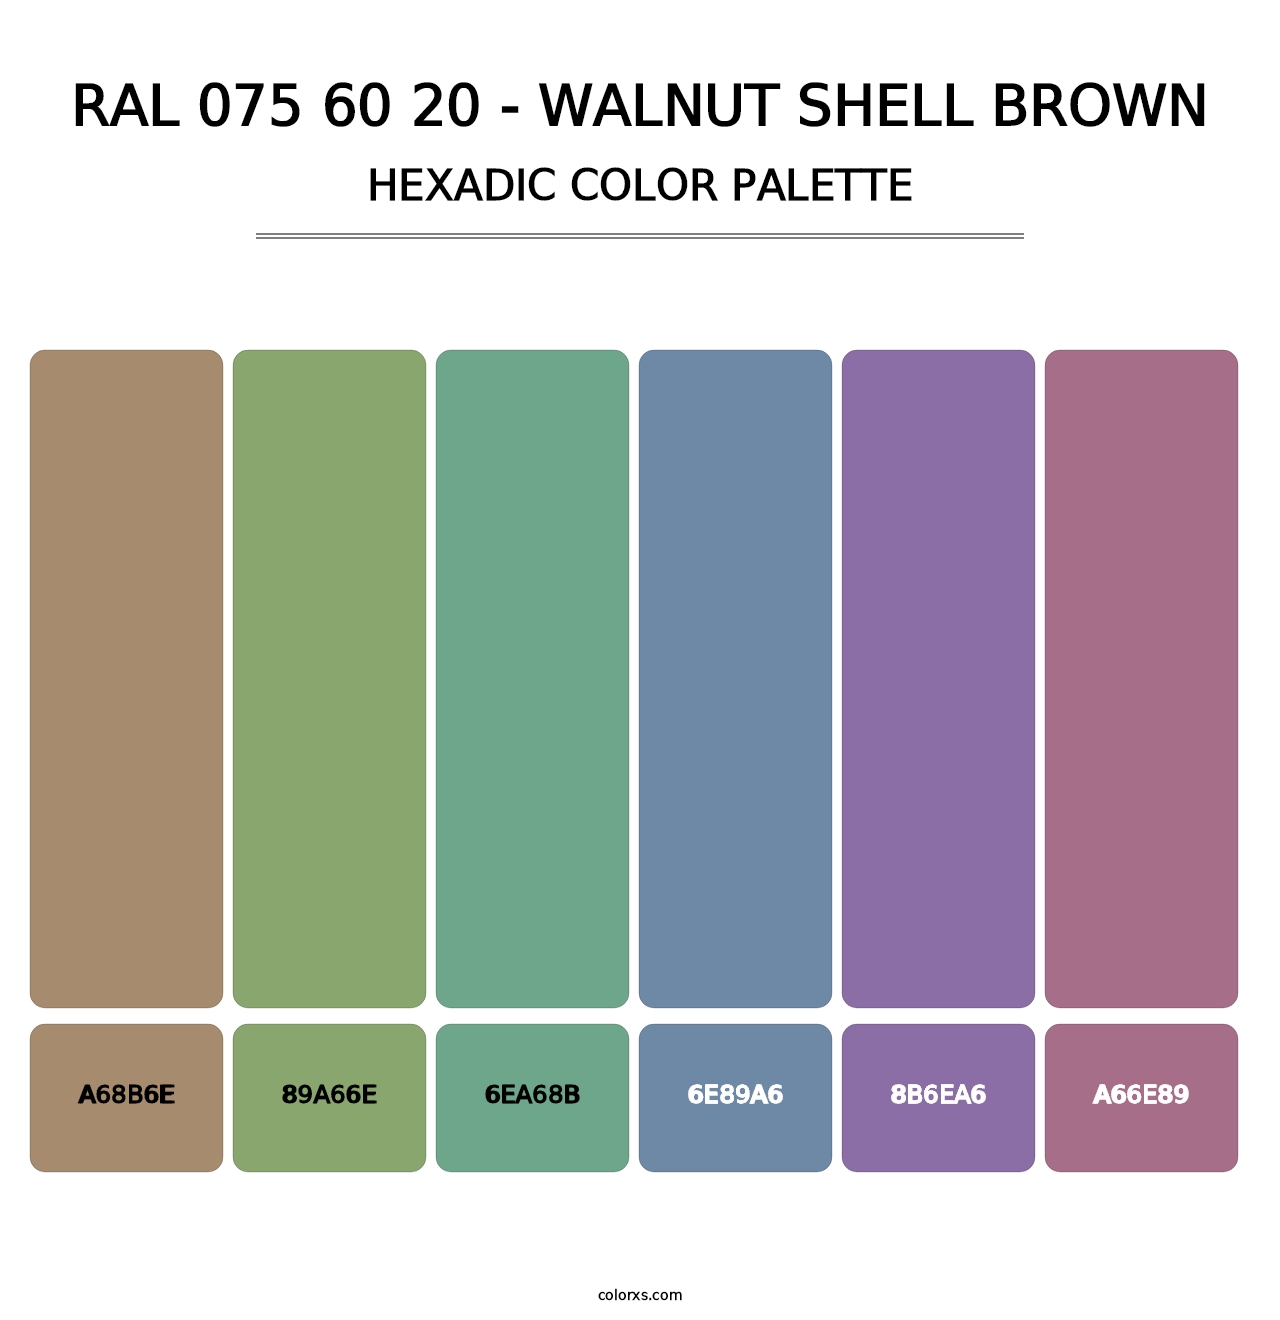 RAL 075 60 20 - Walnut Shell Brown - Hexadic Color Palette